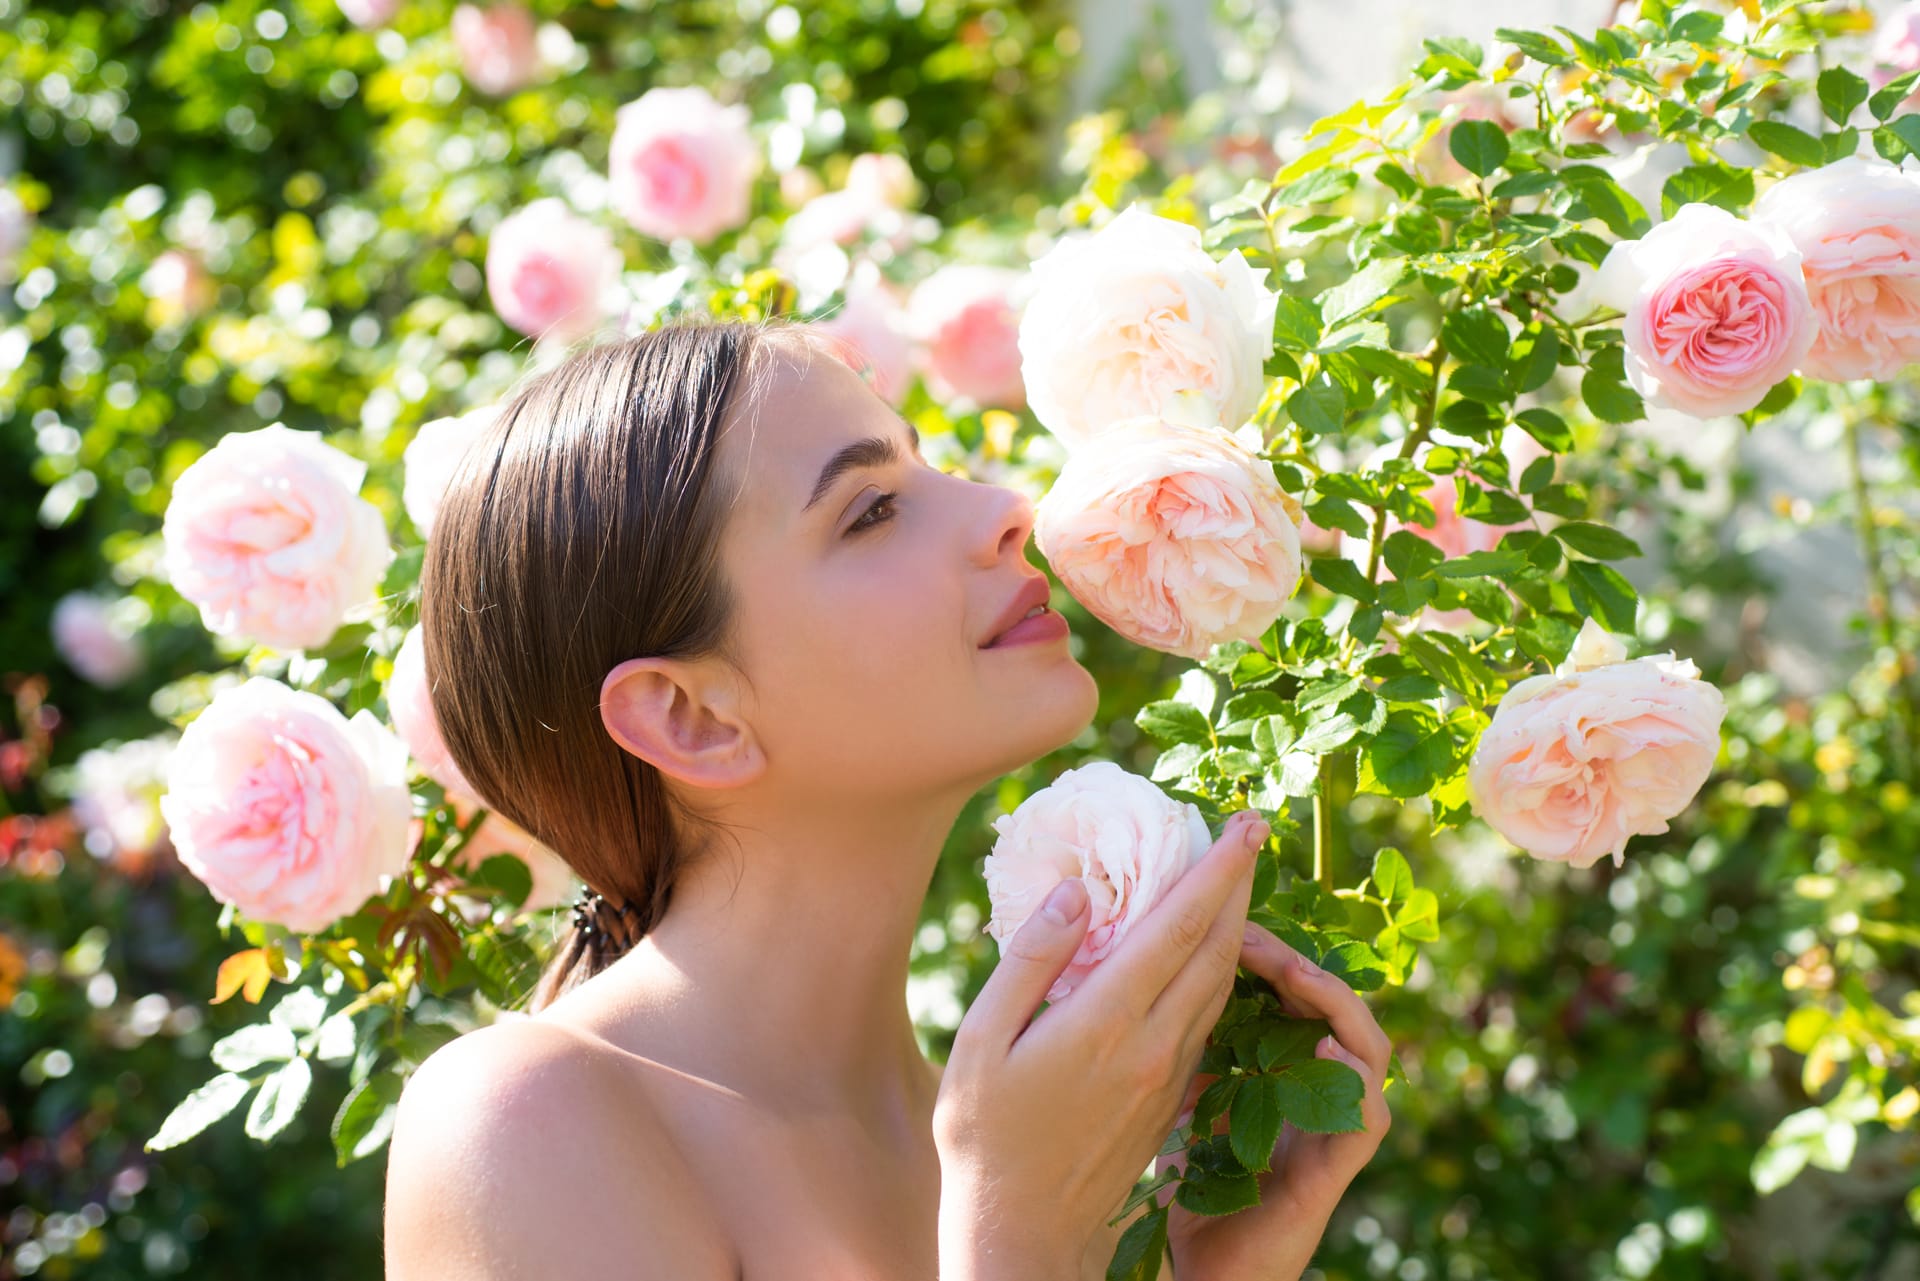 Beautiful young woman posing near roses spring garden candid lifestyle portrait happy young